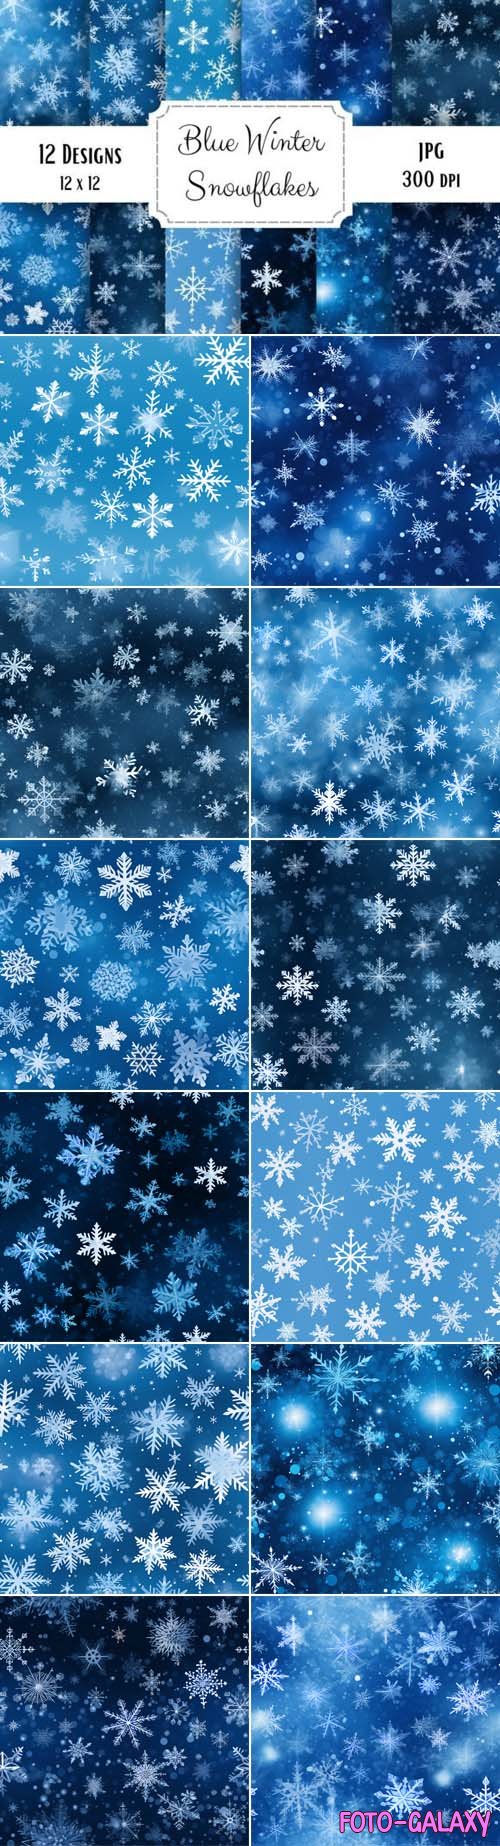 12 Seamless Blue Winter Snowflakes Patterns Pack